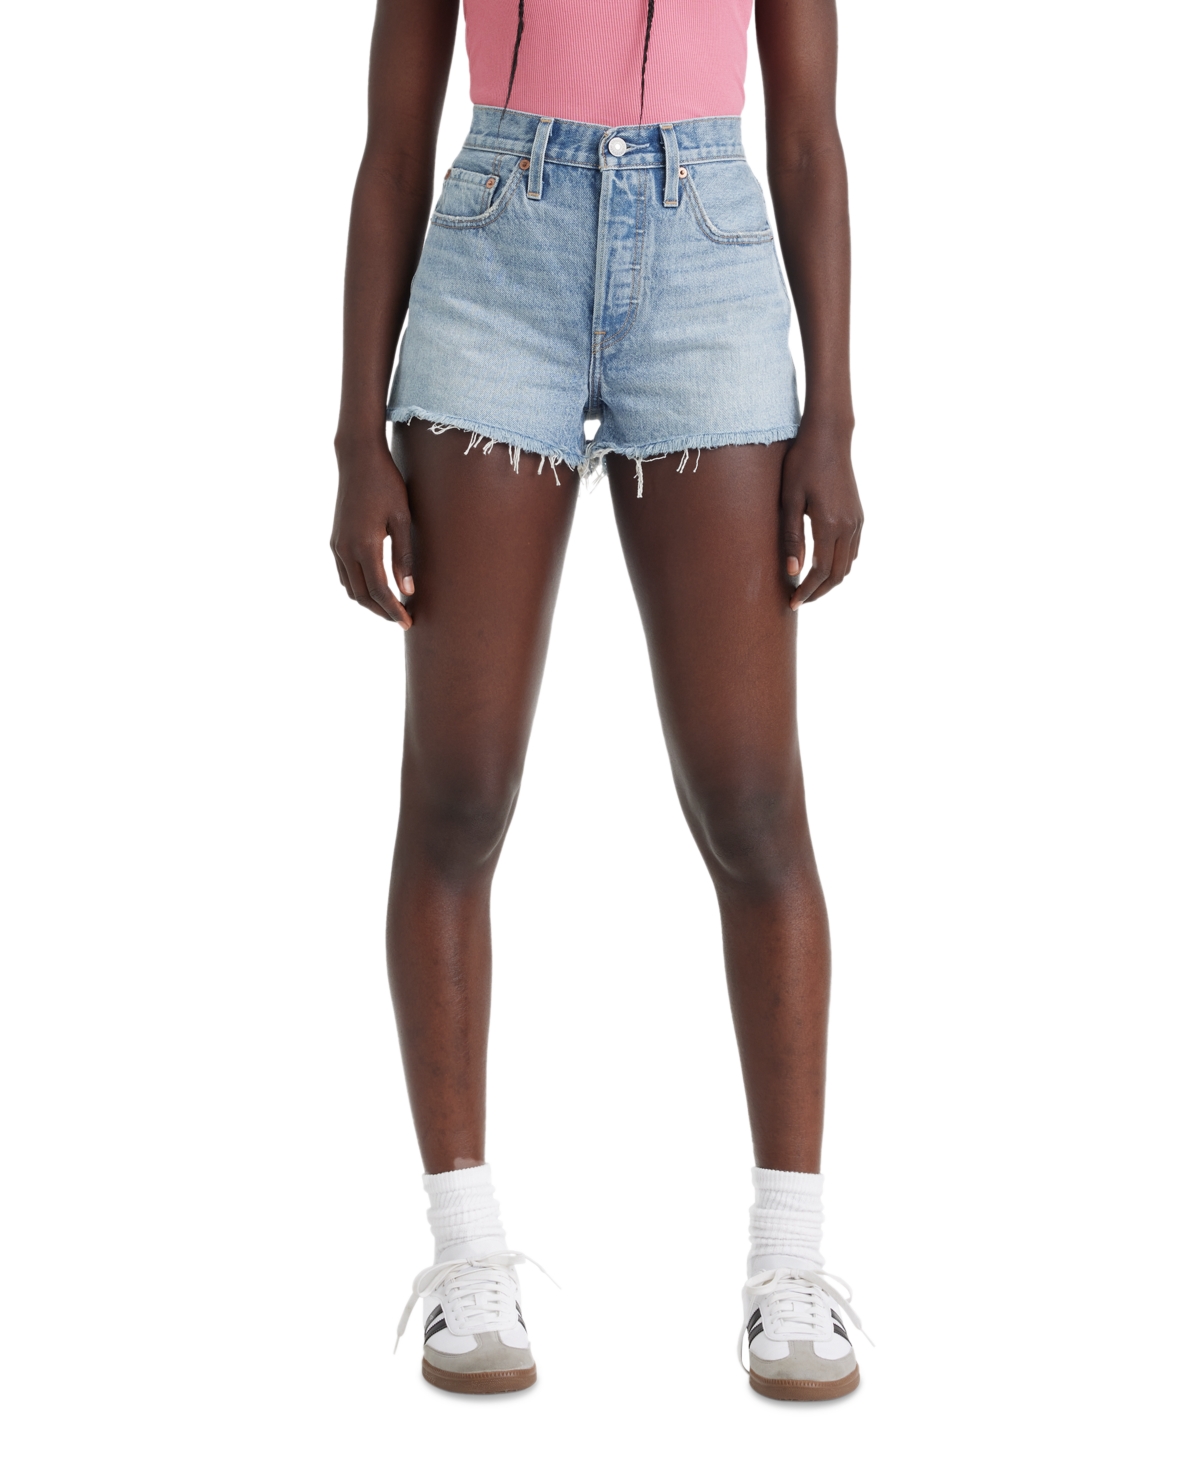 Levi's Women's 501 Button Fly Cotton High-rise Denim Shorts In Micro Vibes